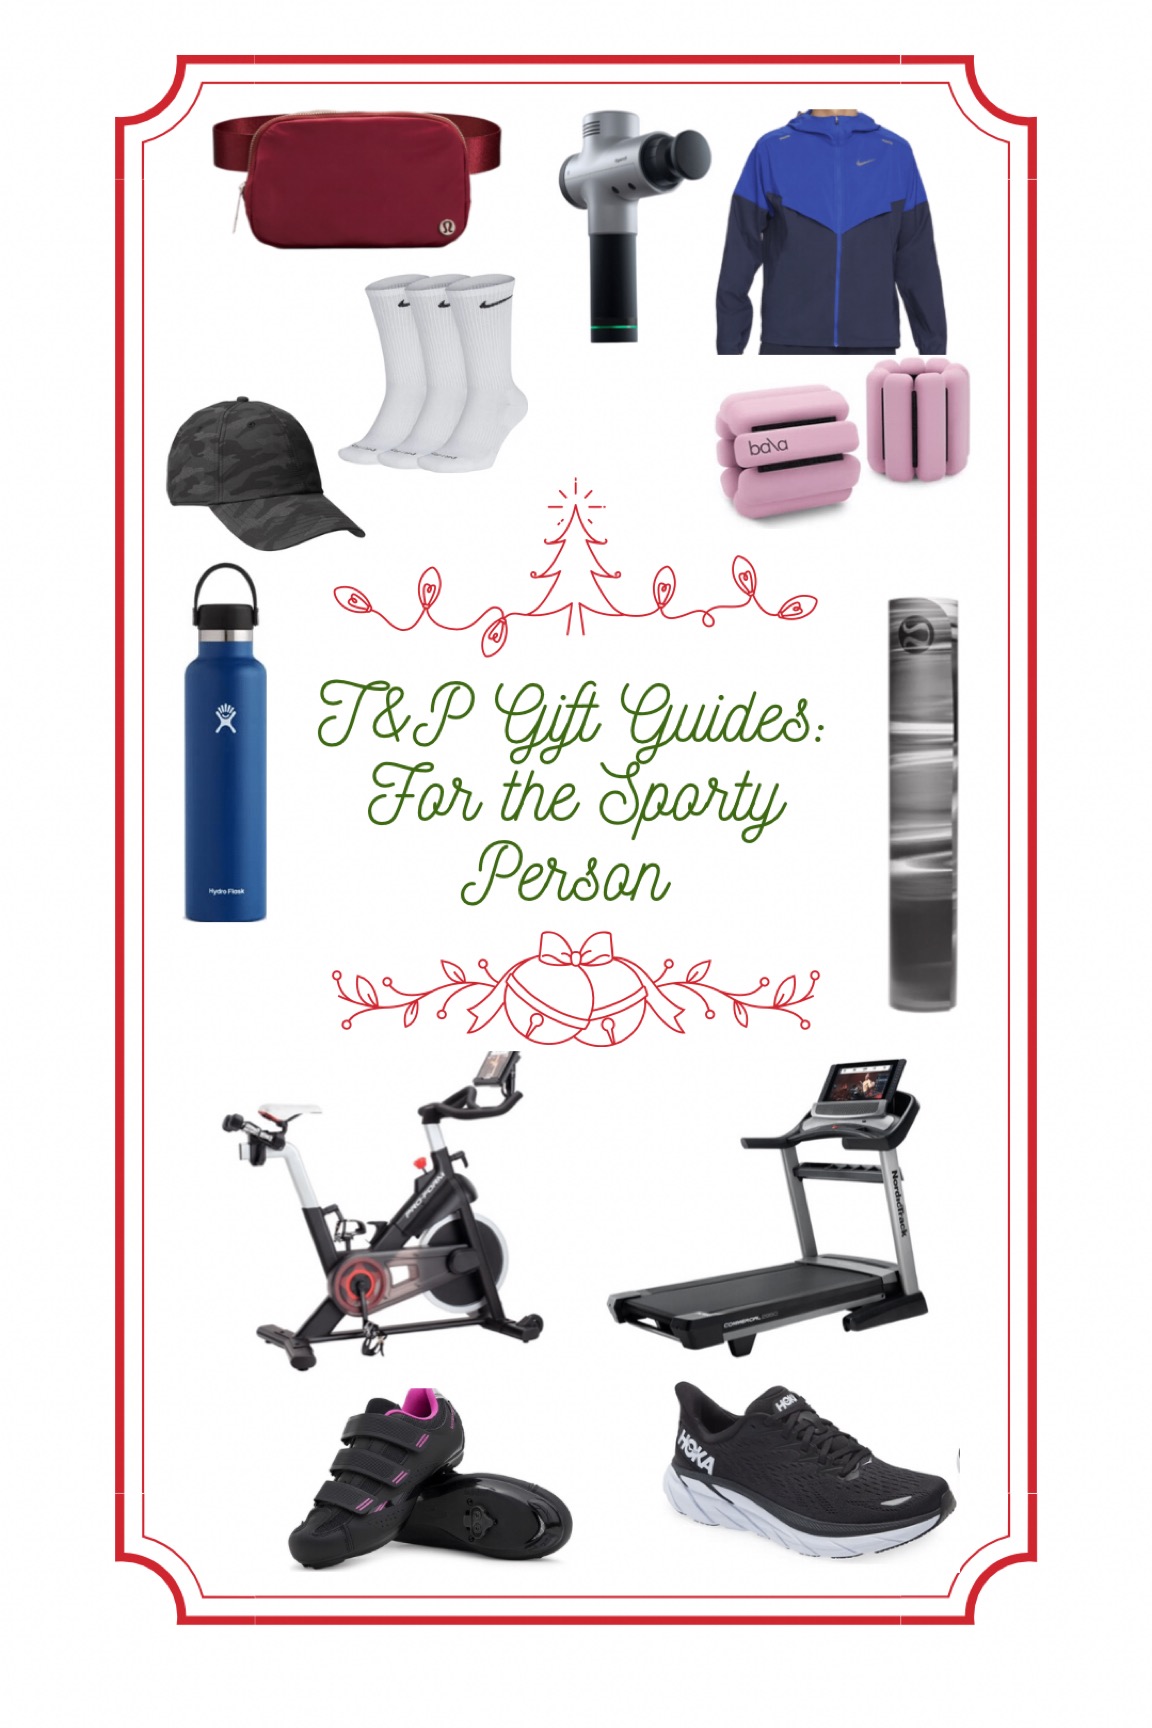 gifts for the sporty person, trainers, sneakers, cycling shoes, athletic, exercise, fit person, indoor bike, stationary bike, exercise bike, yoga matt, workout bag, belt bag, fanny pack, water bottle, hydro flask, treadmill, sneakers, weights, ankle weights